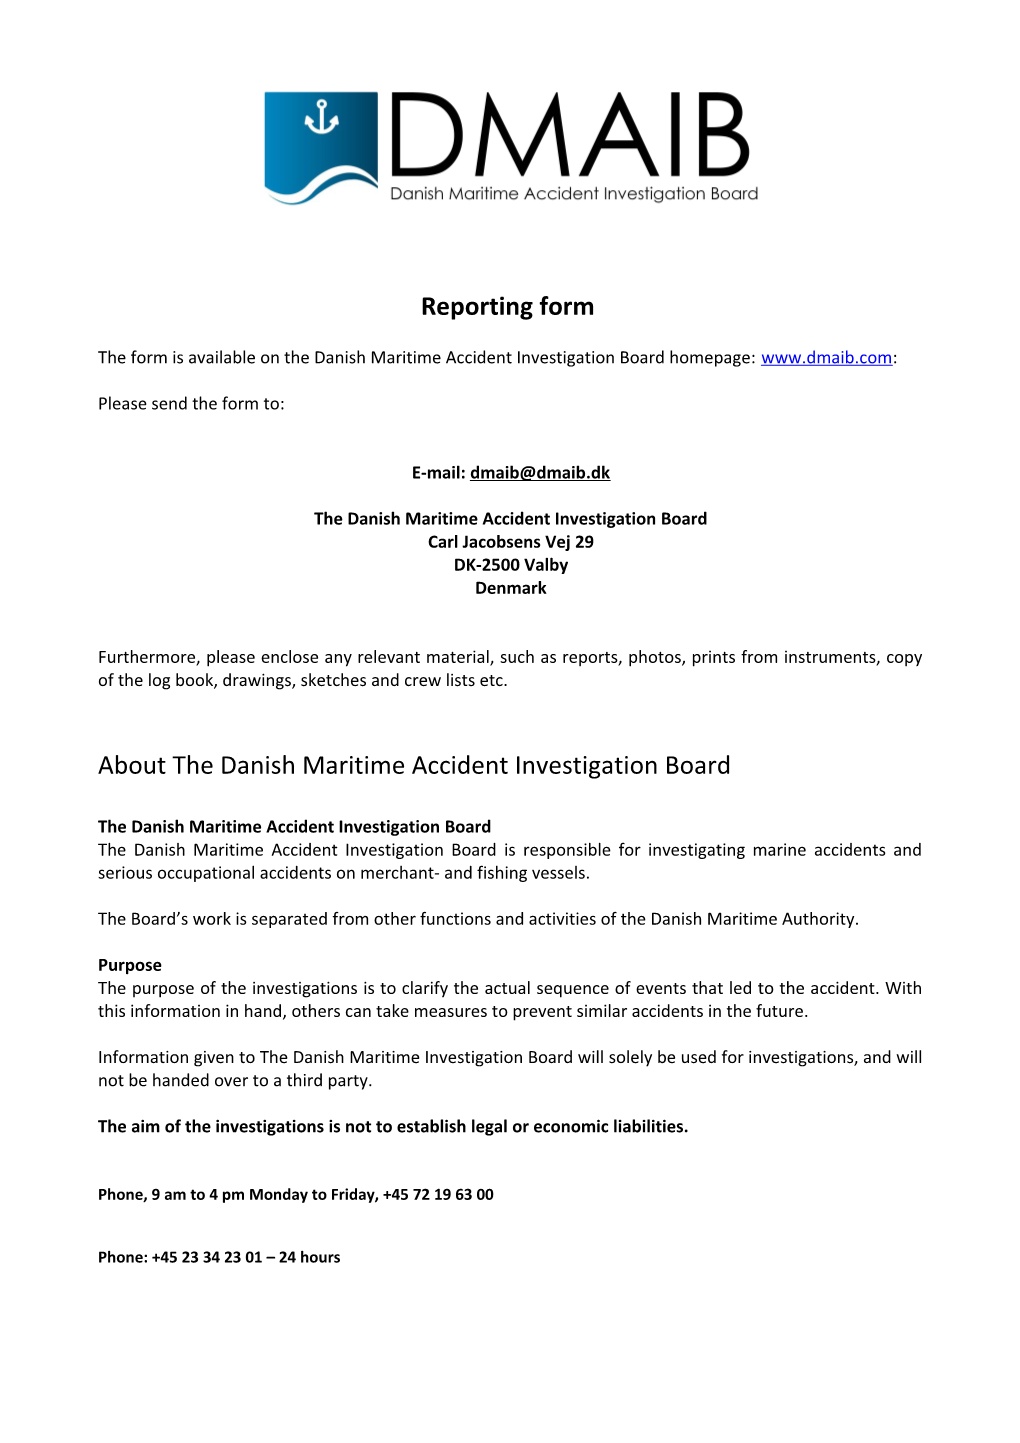 The Form Is Available on the Danish Maritime Accident Investigation Board Homepage